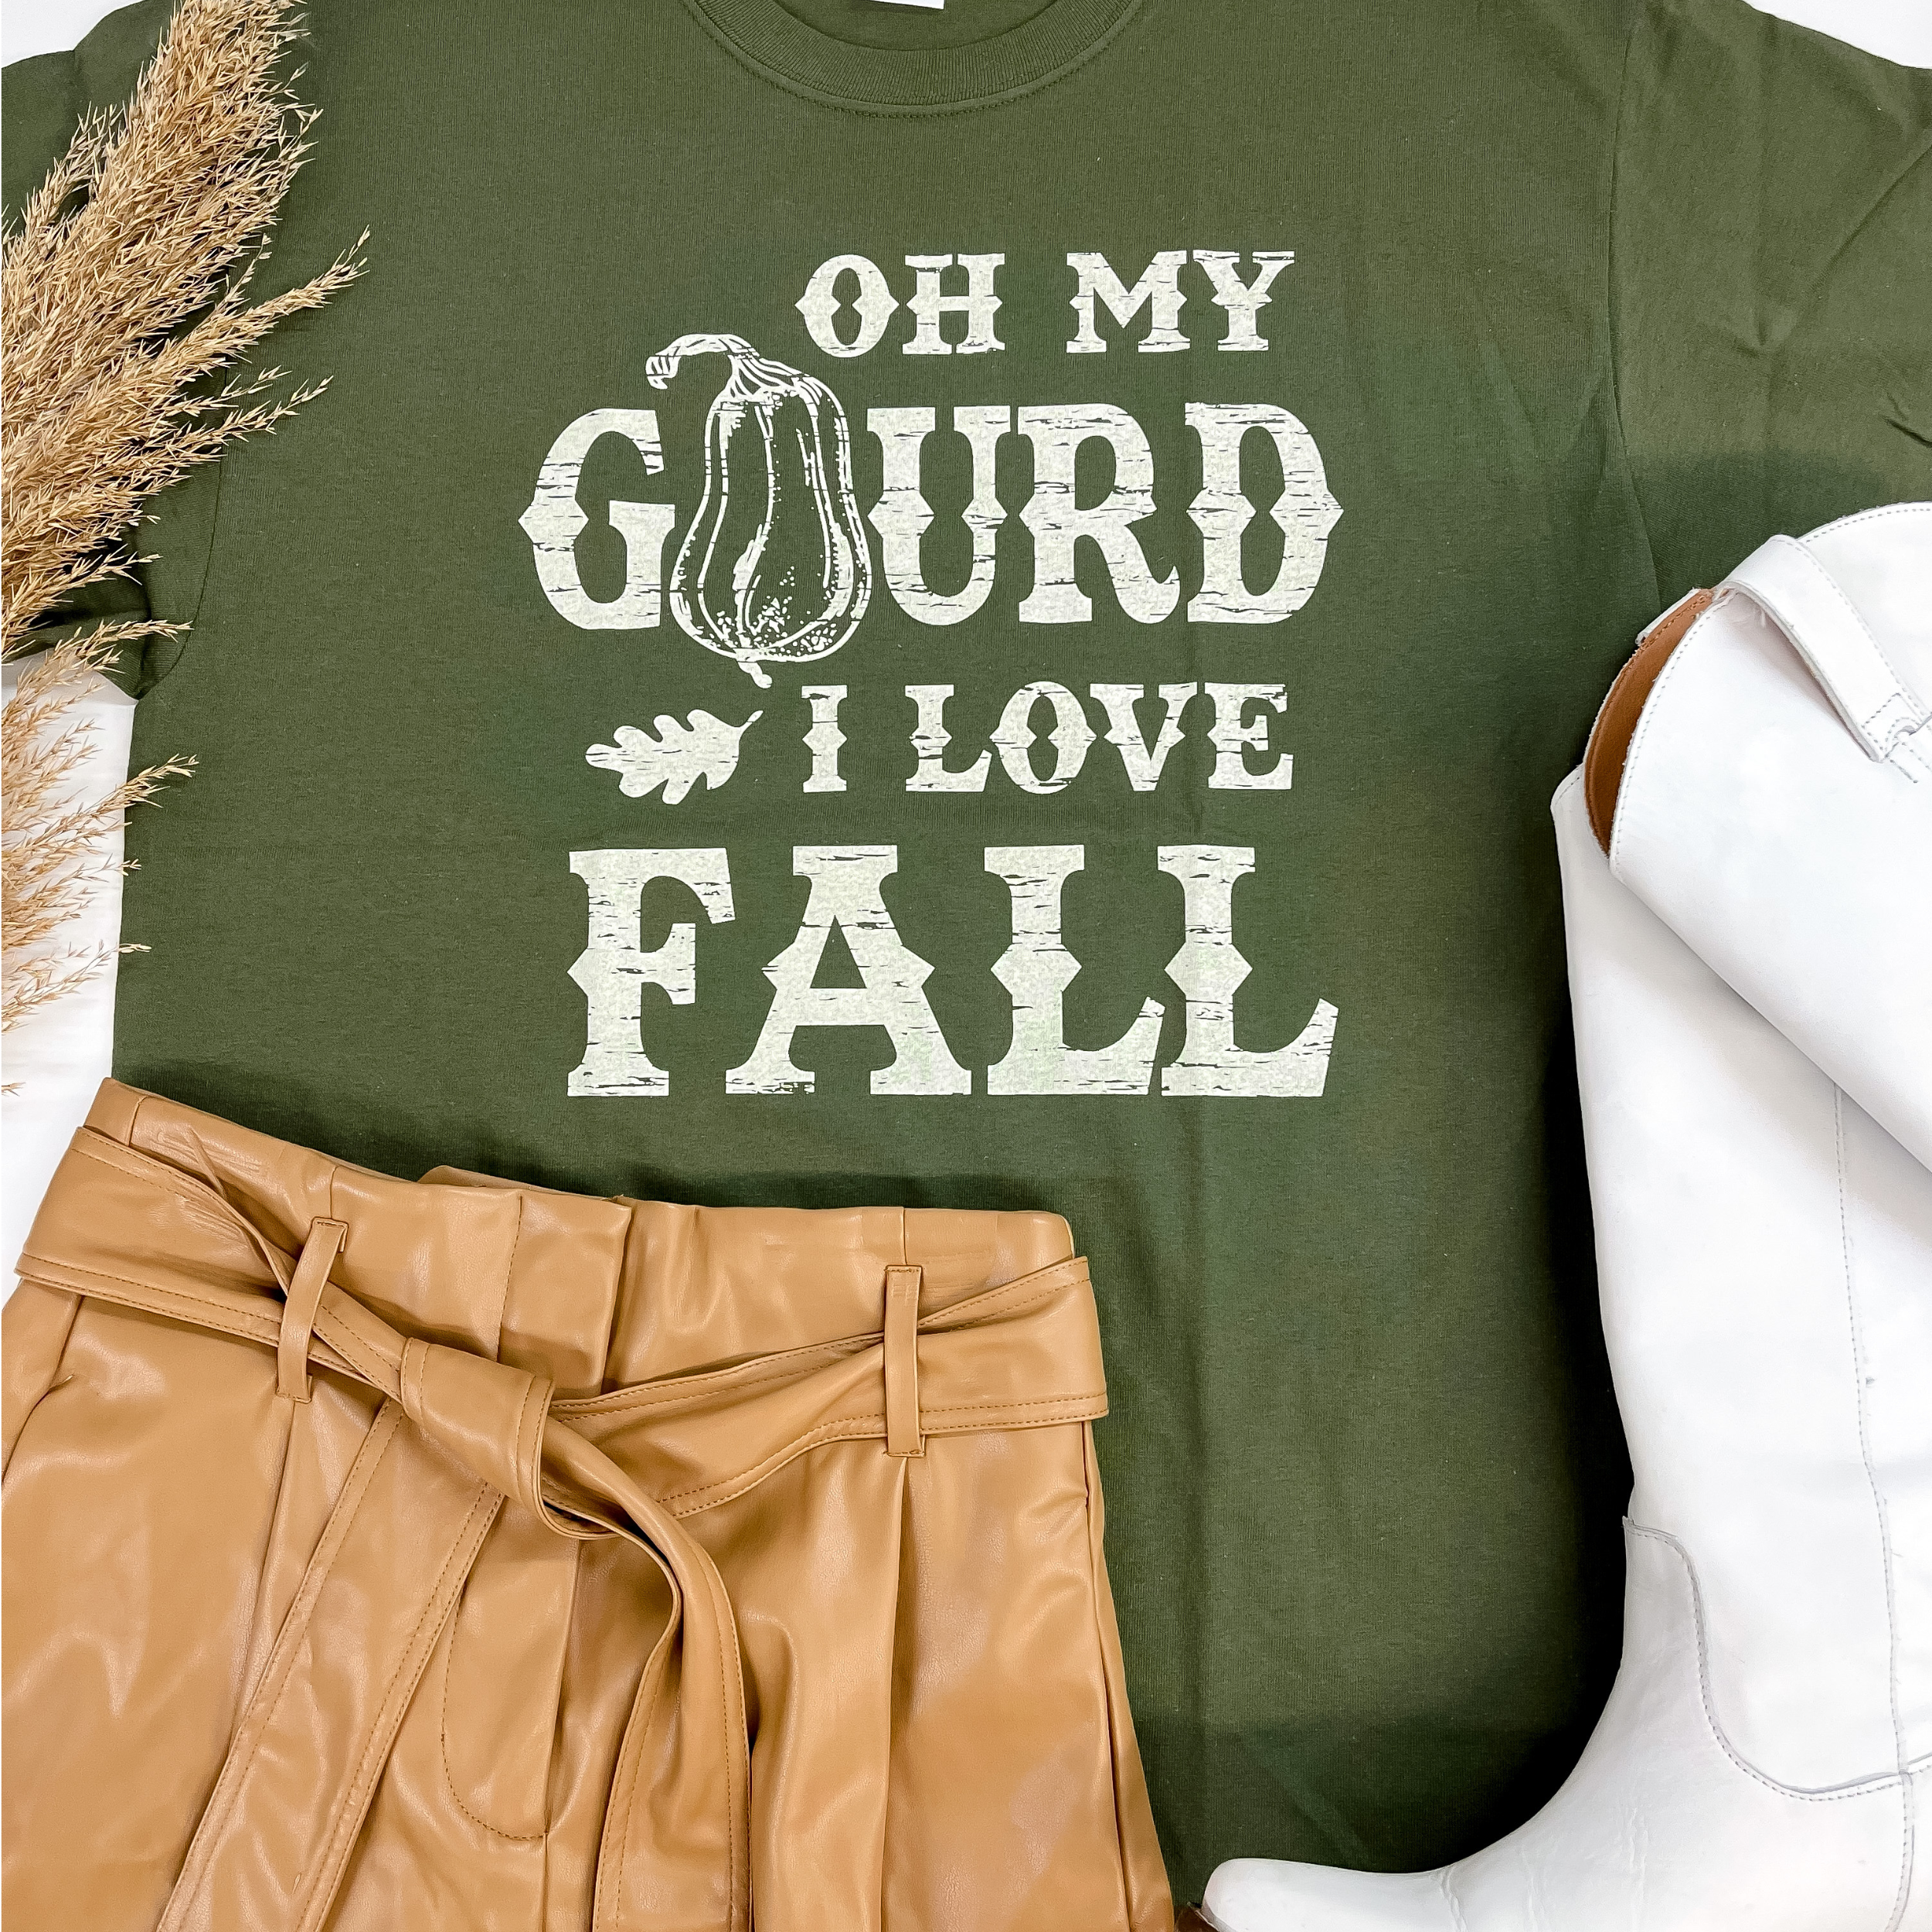 A folded tee shirt that is moss green. The t-shirt has white lettering that says "Oh my Gourd I love fall". Pictured on a white background with tan faux leather shorts and white boots.